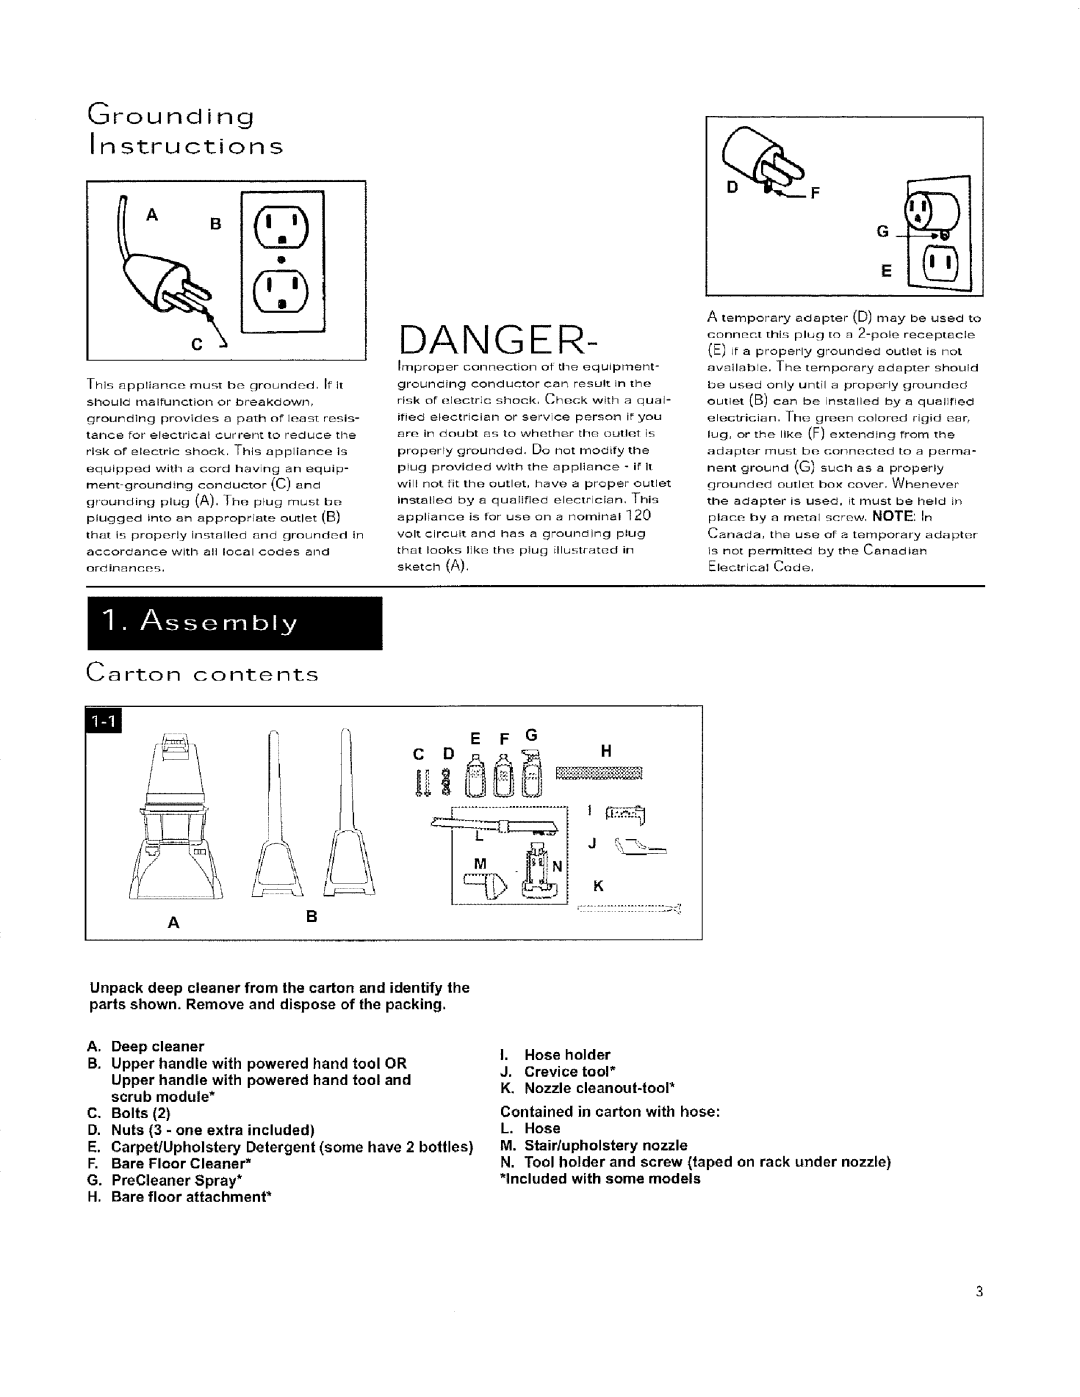 Hoover 56518114 manual Grounding Instructions, Carton contents, E F G C Dh, A. Deep cleaner, Danger, M .N J, an equip, ifit 